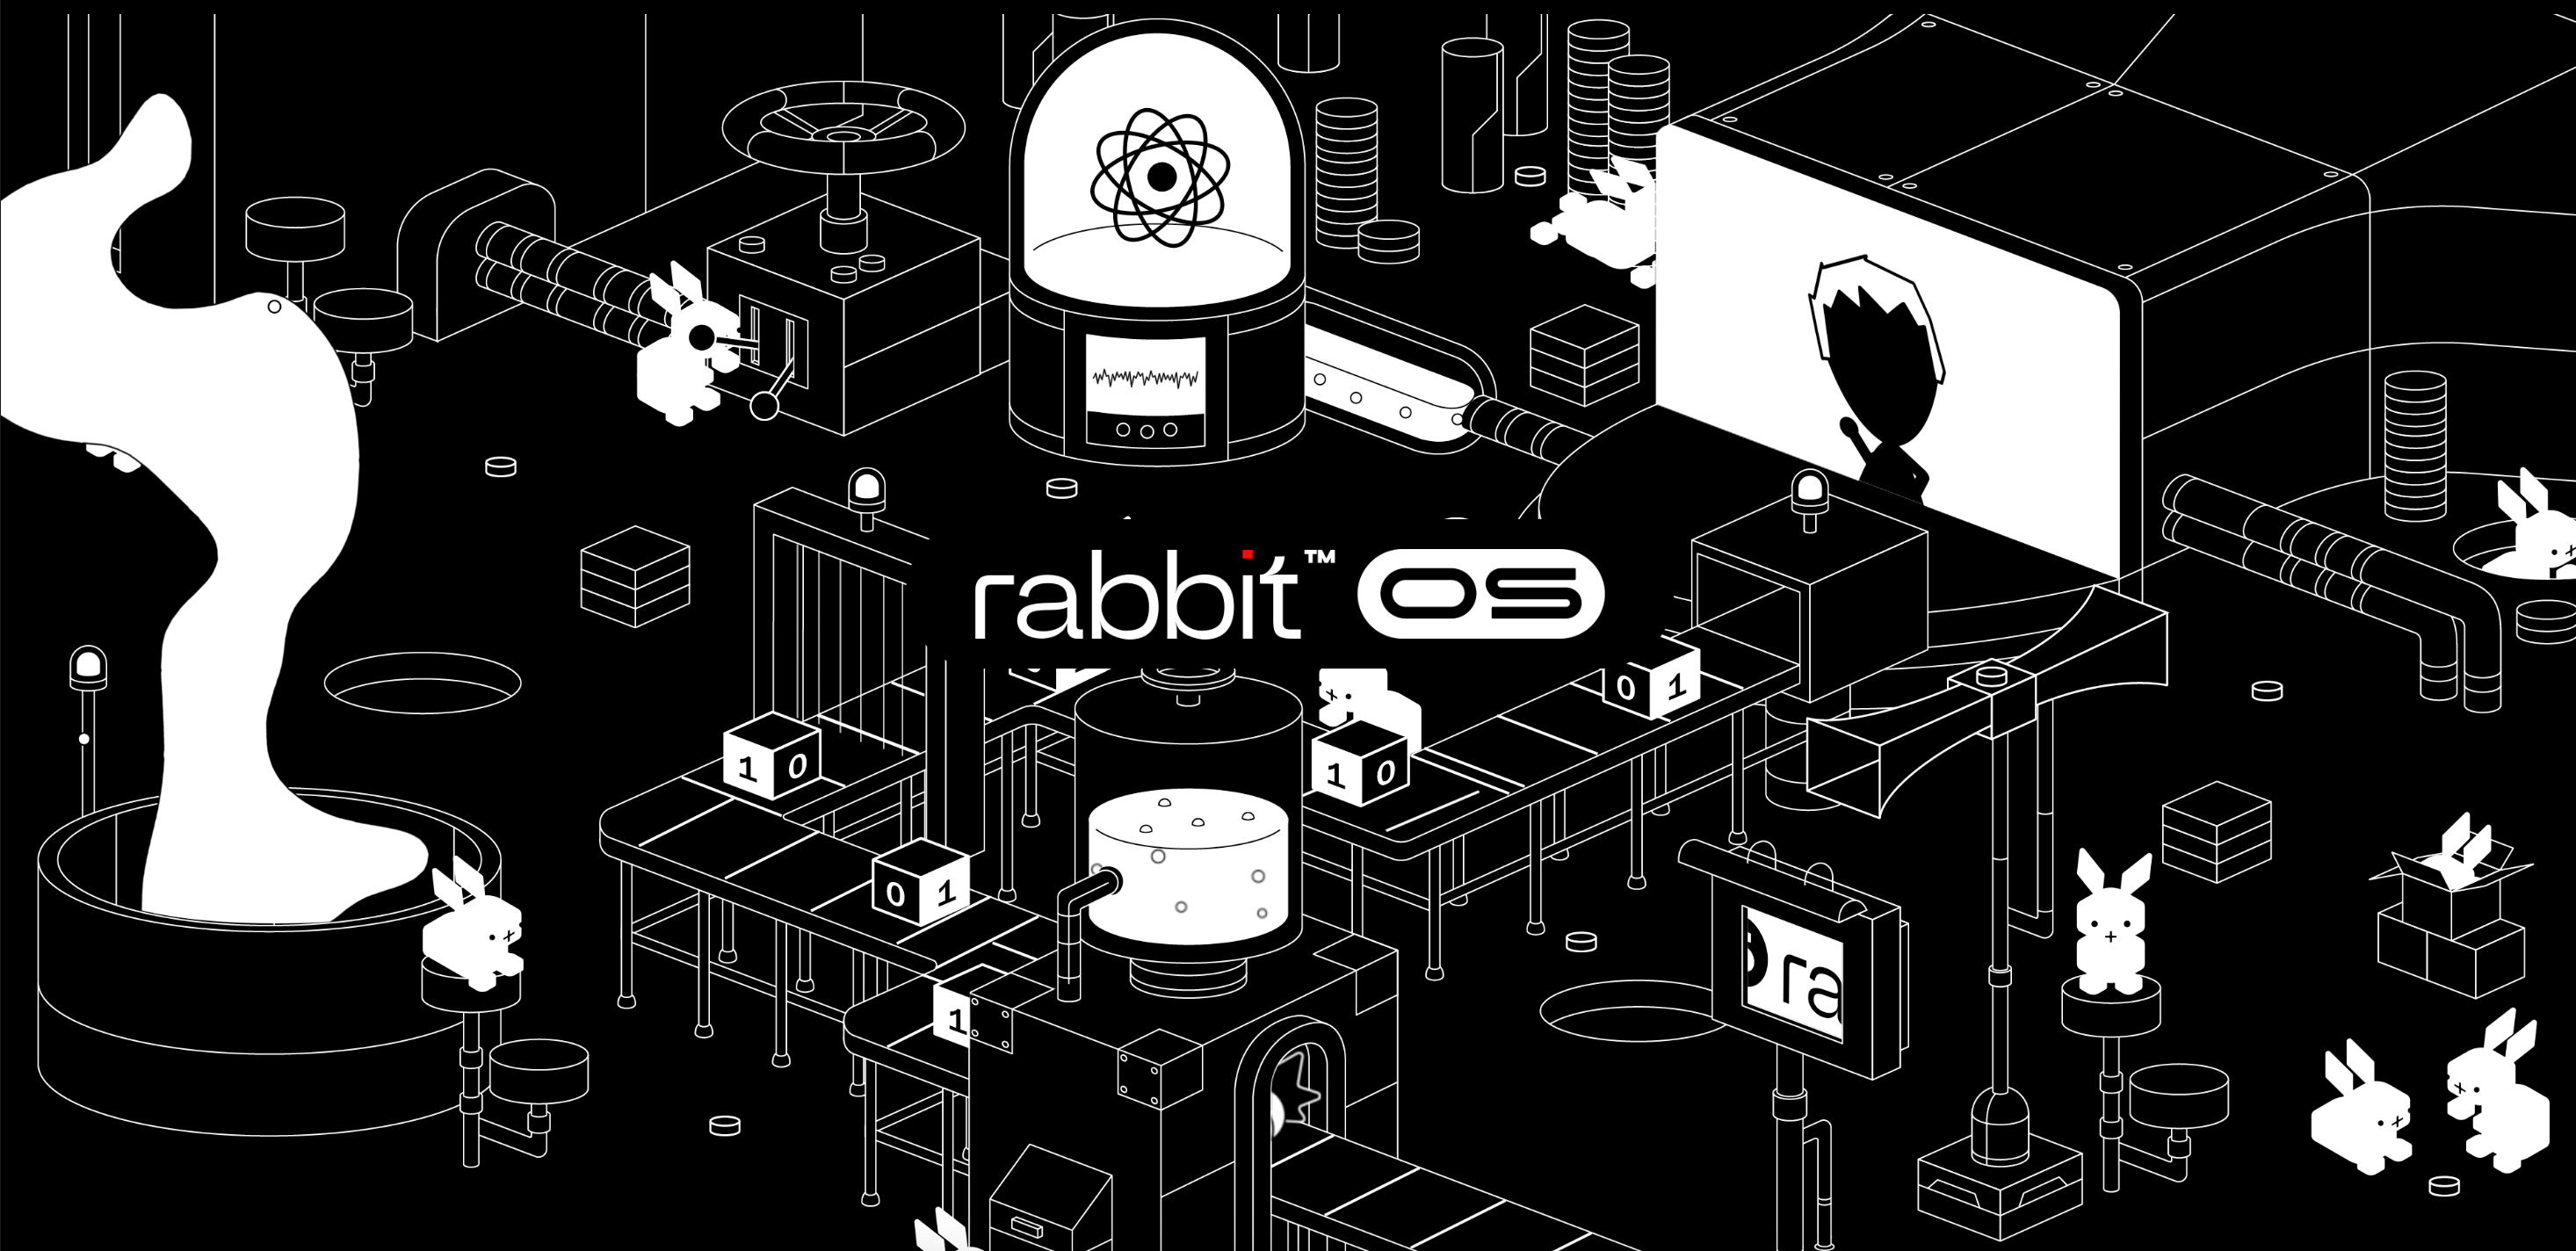 Introducing Rabbit R1 - Your AI-powered Personal Assistant 